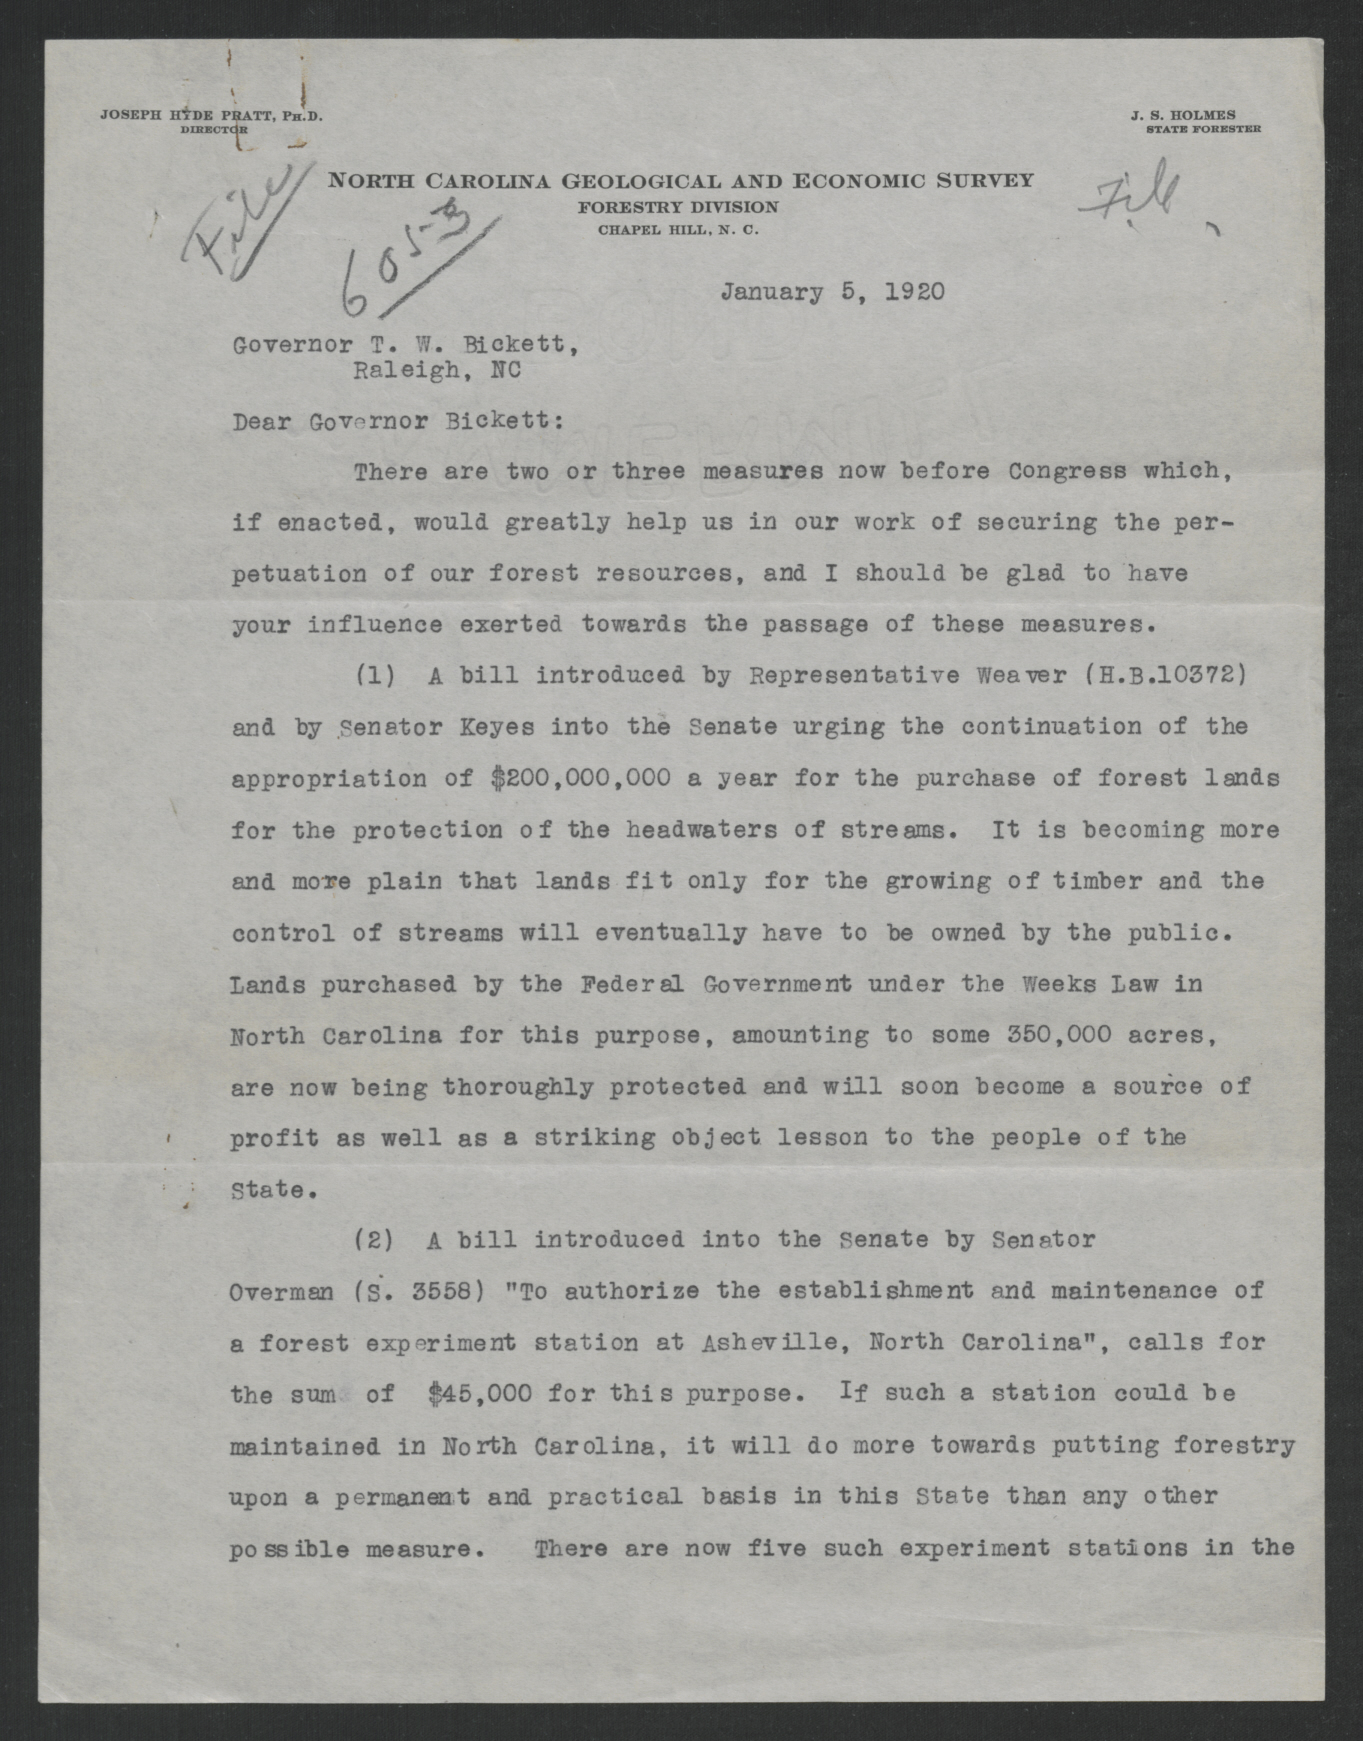 Letter from John S. Holmes to Thomas W. Bickett, January 5, 1920, page 1